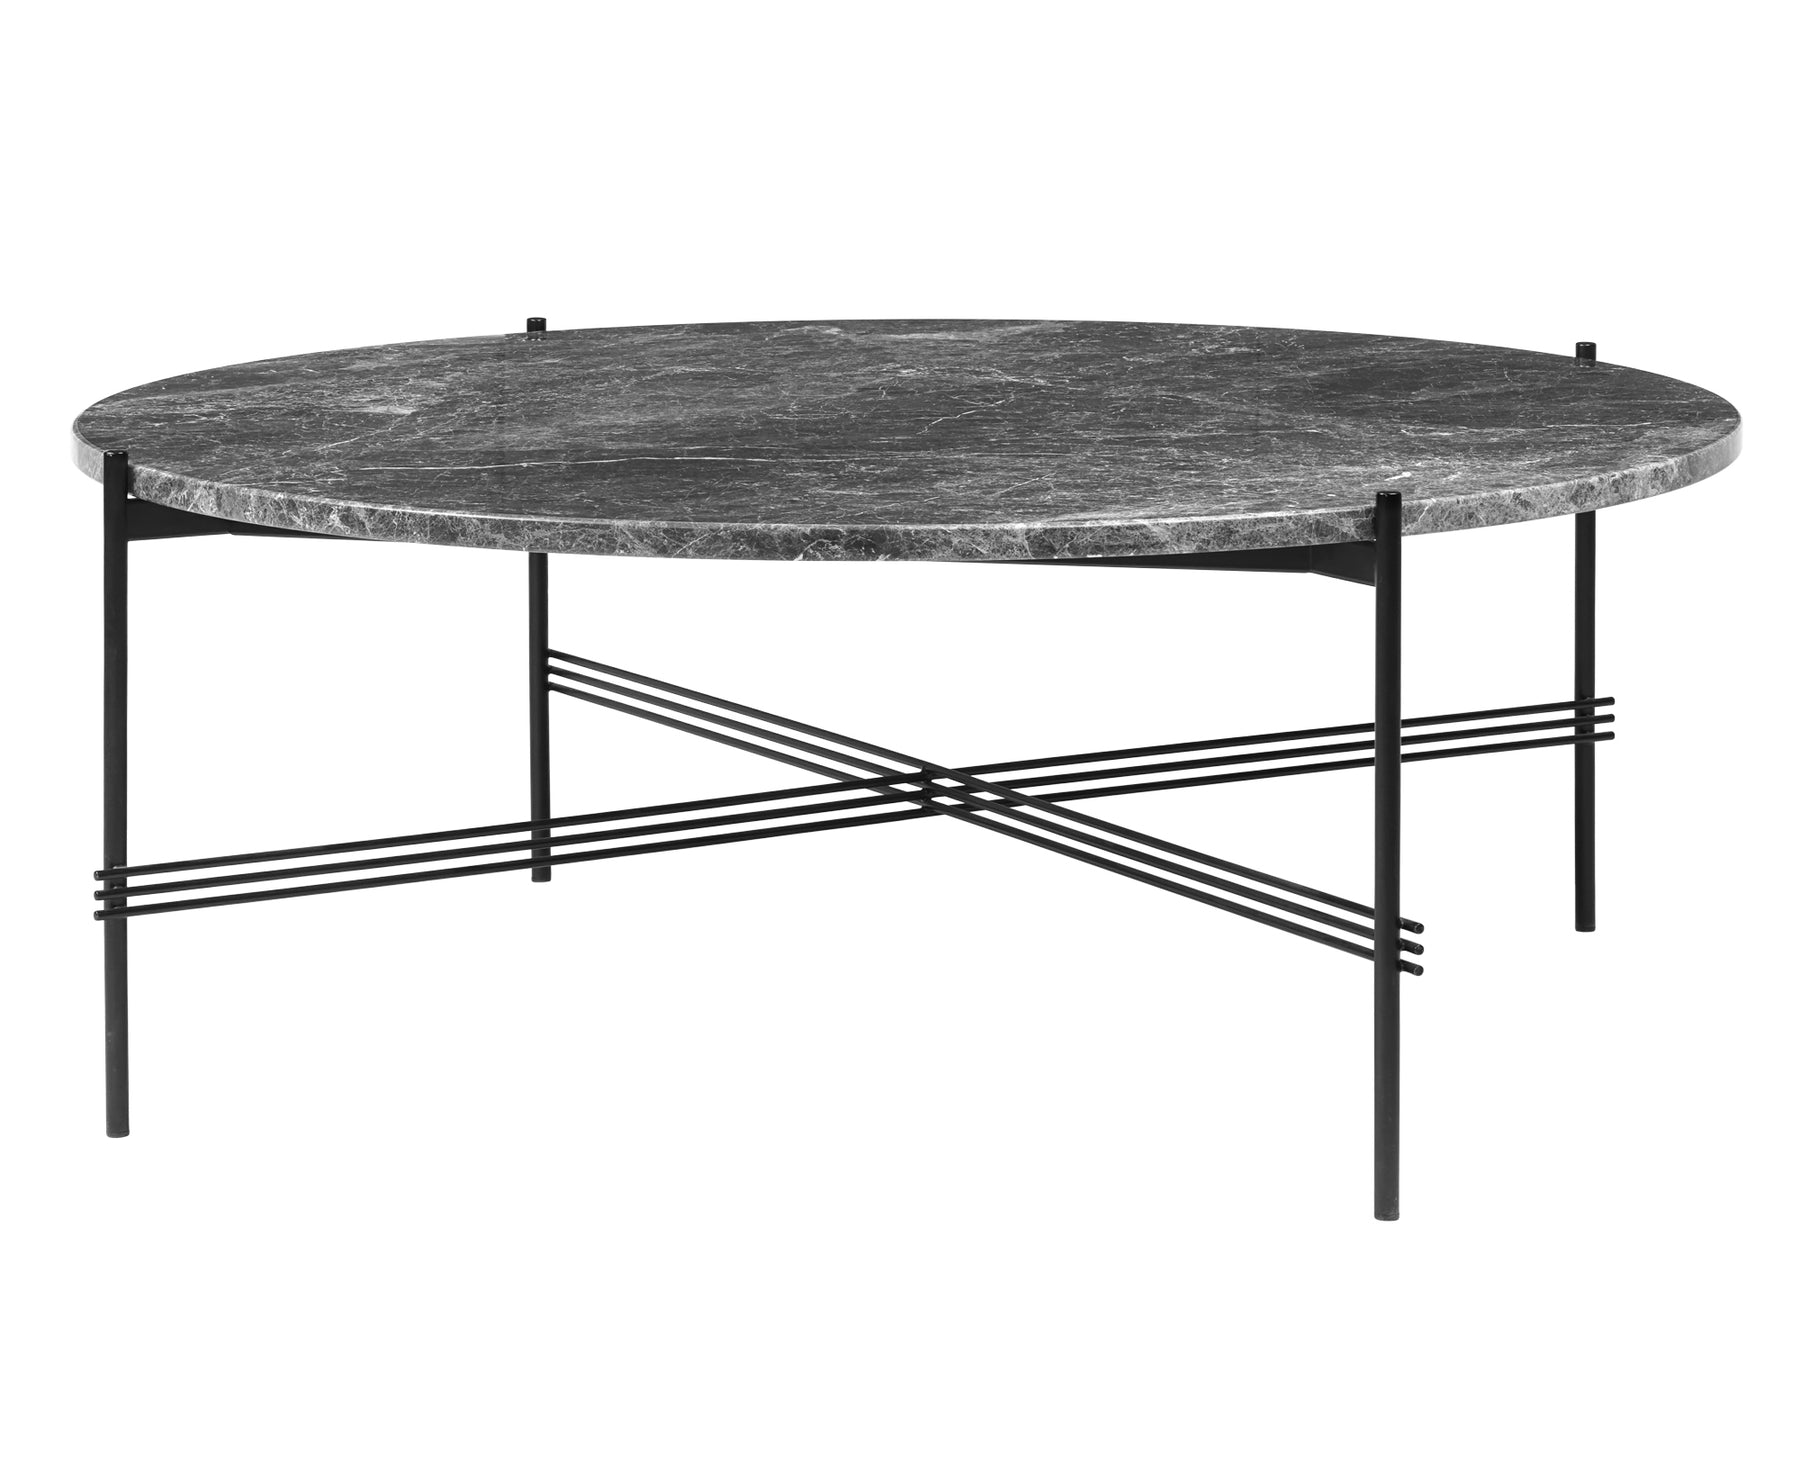 TS Lounge Table X-Large - Marble | DSHOP